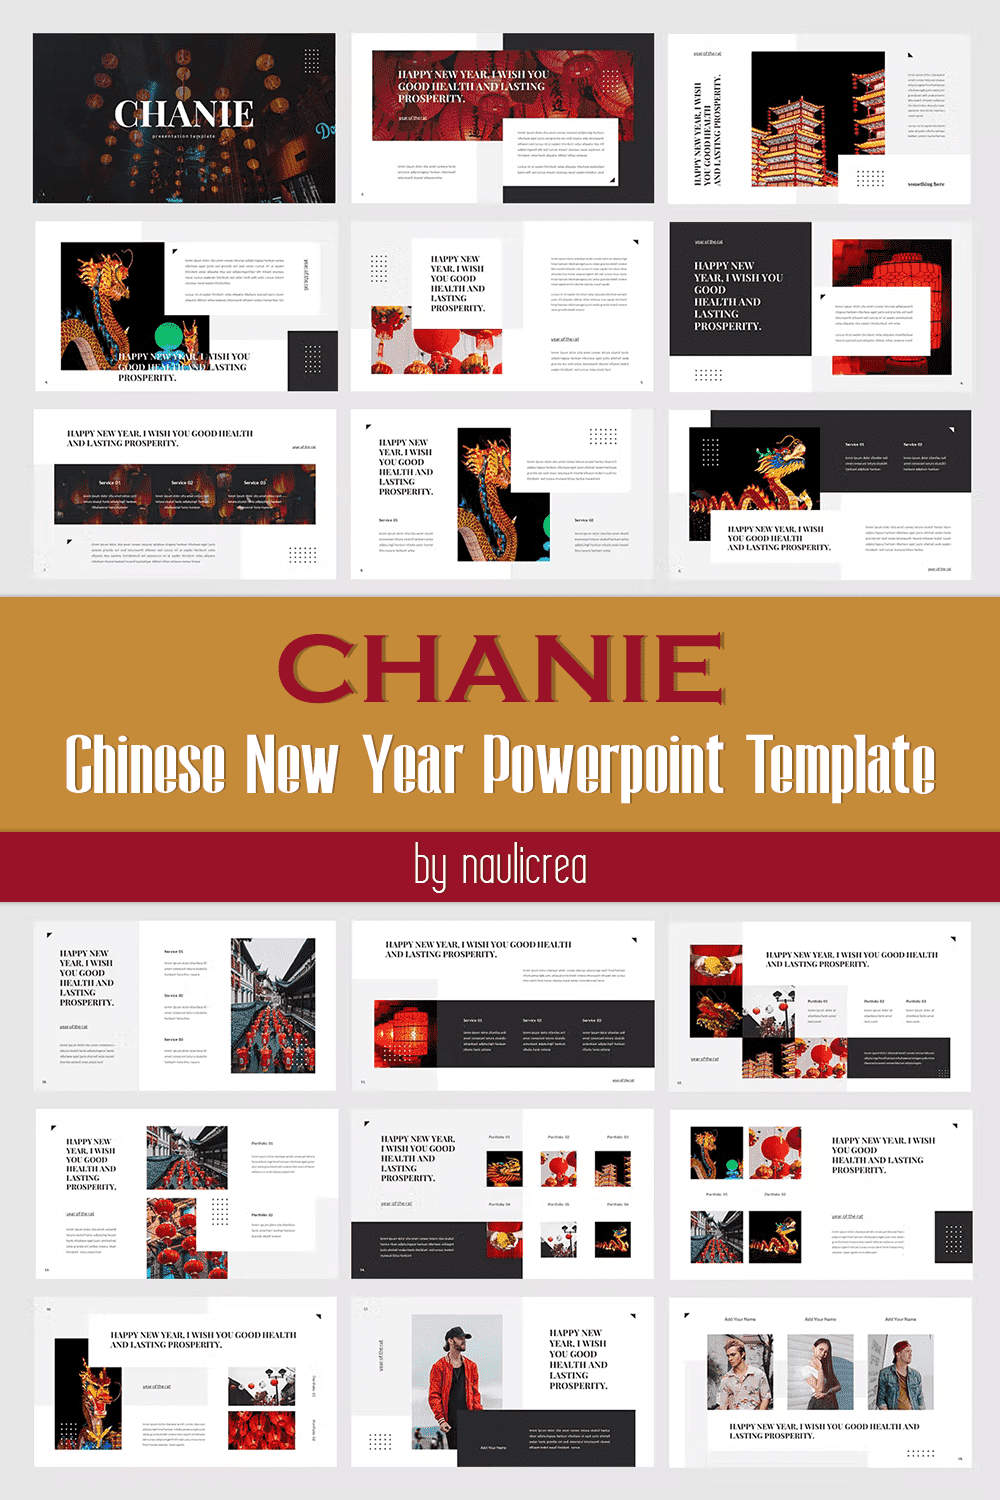 Chanie - chinese new year powerpoint template, picture for Pinterest.